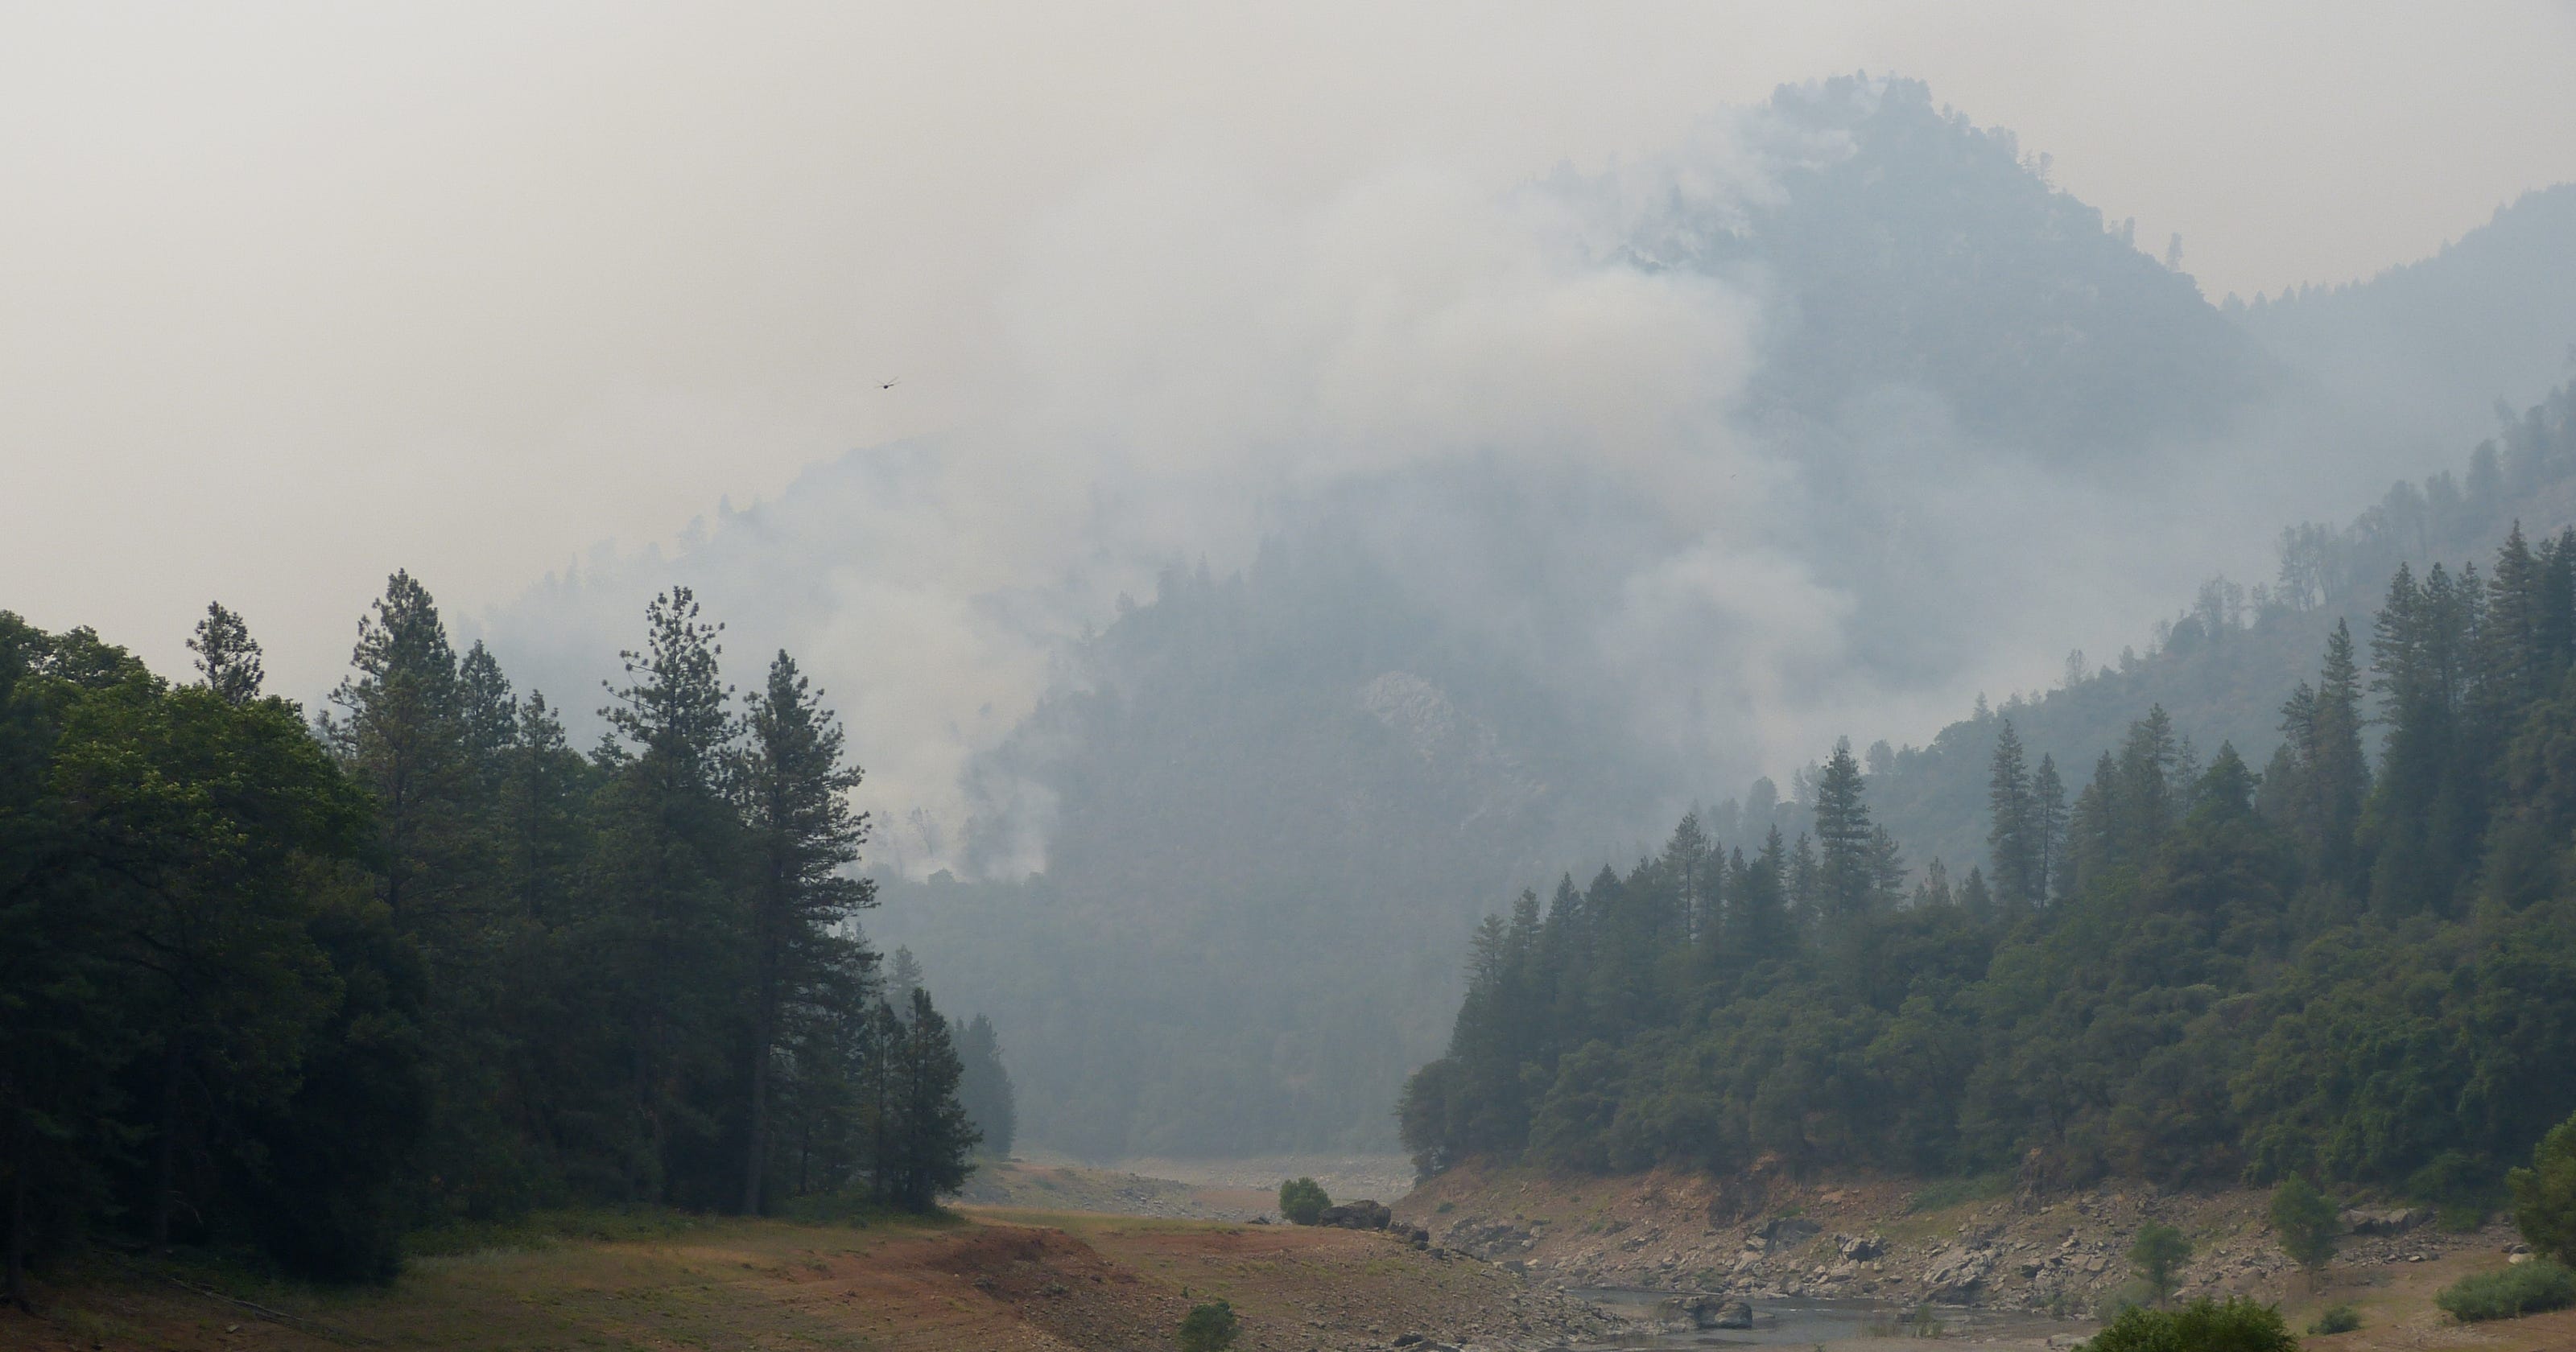 UPDATE Three fires near Lake Shasta grow to 450 acres